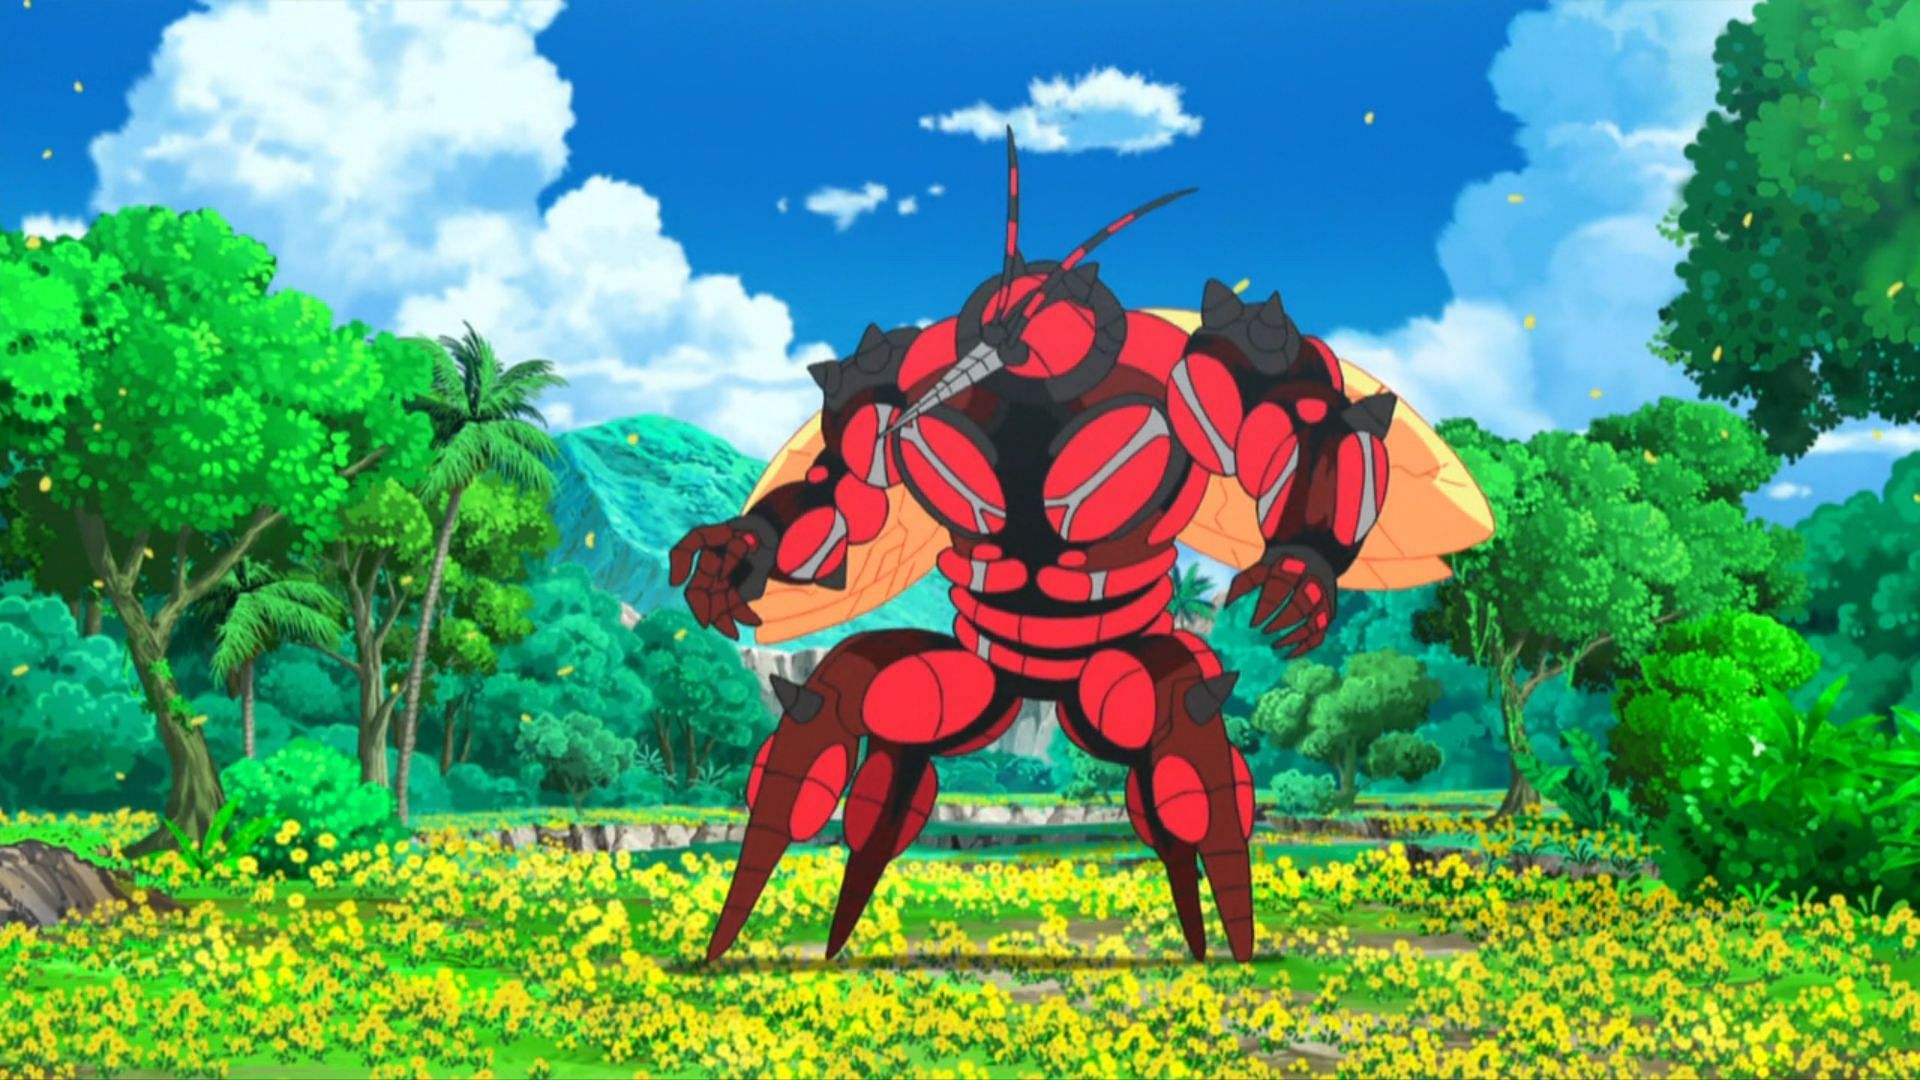 Buzzwole has also been leaked to be coming to the game (Image via The Pokemon Company)